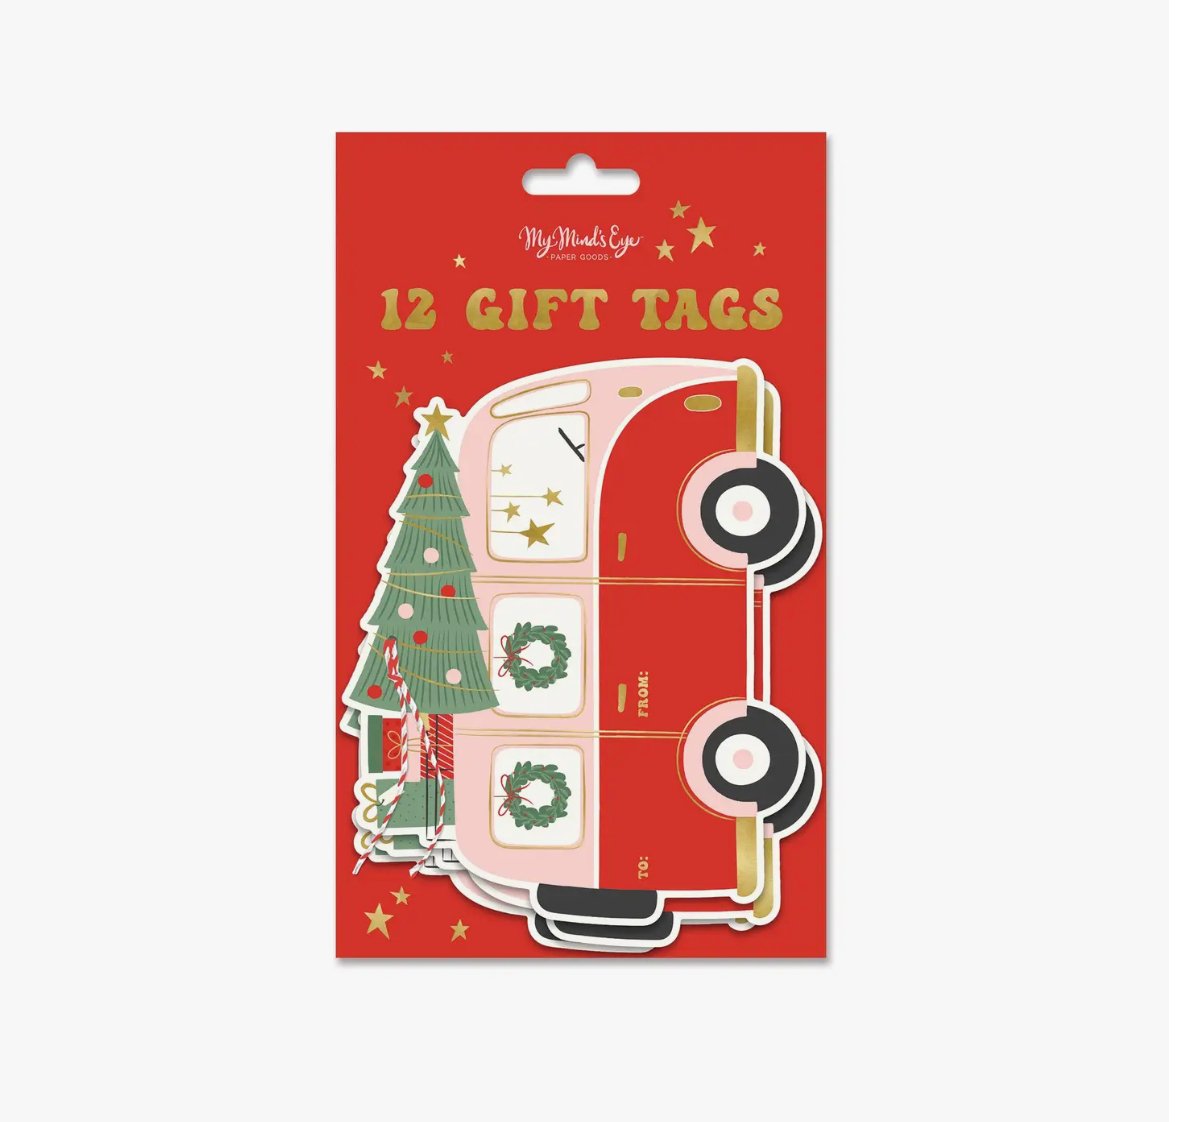 Retro Christmas Van Large Gift Tags - Henry + Olives